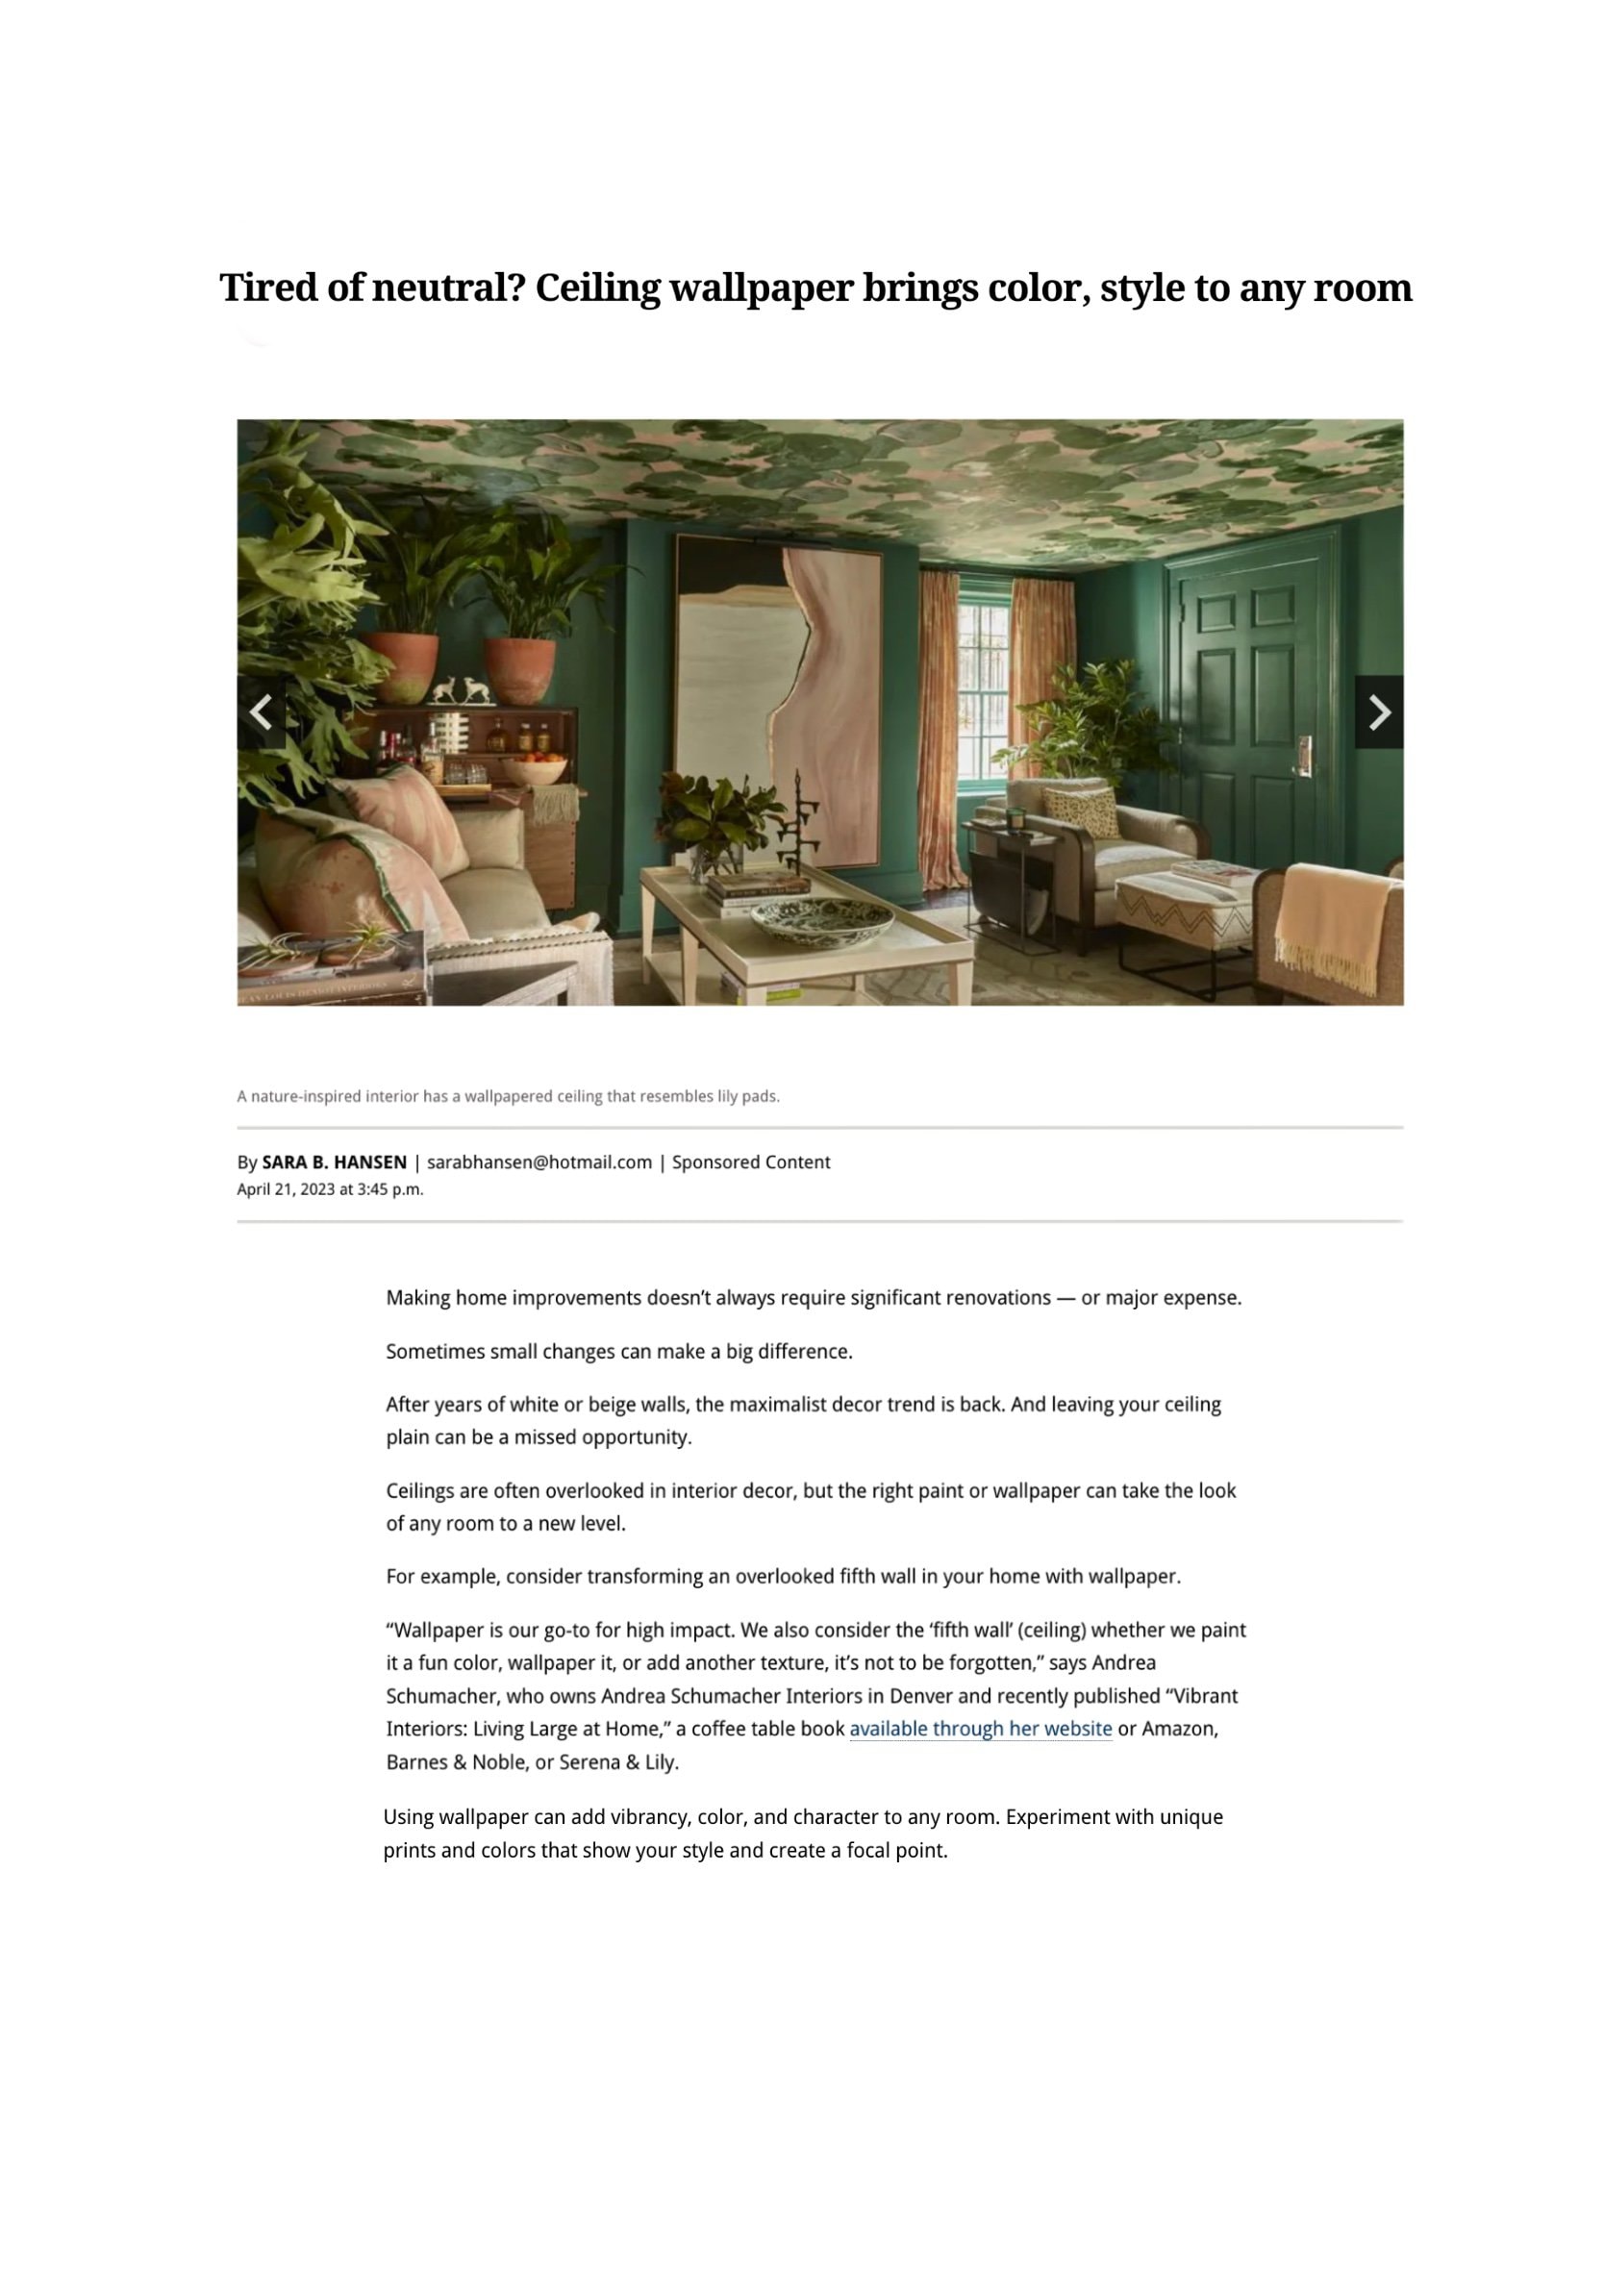 Denver Post article about wallpapering your ceiling and colorful room inspiration